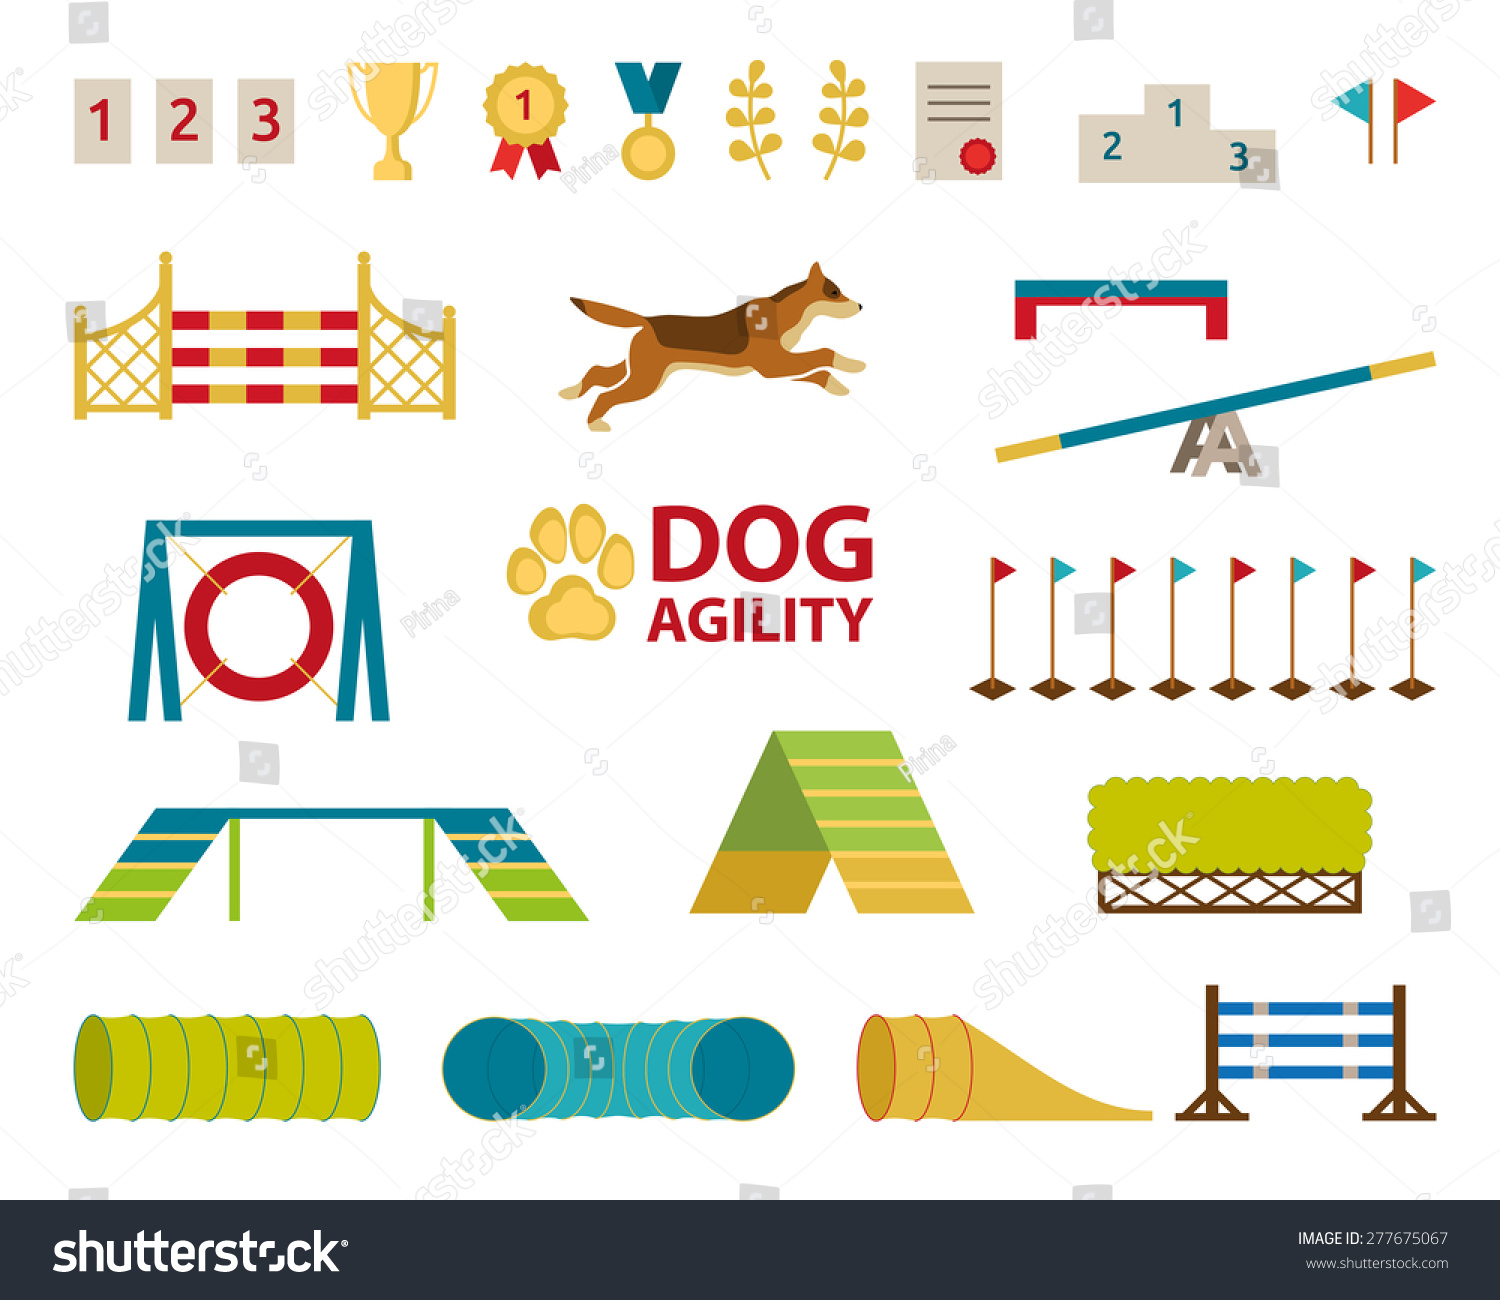 Dog Agility Jumping Obstacle Set Stock Vector Illustration 277675067